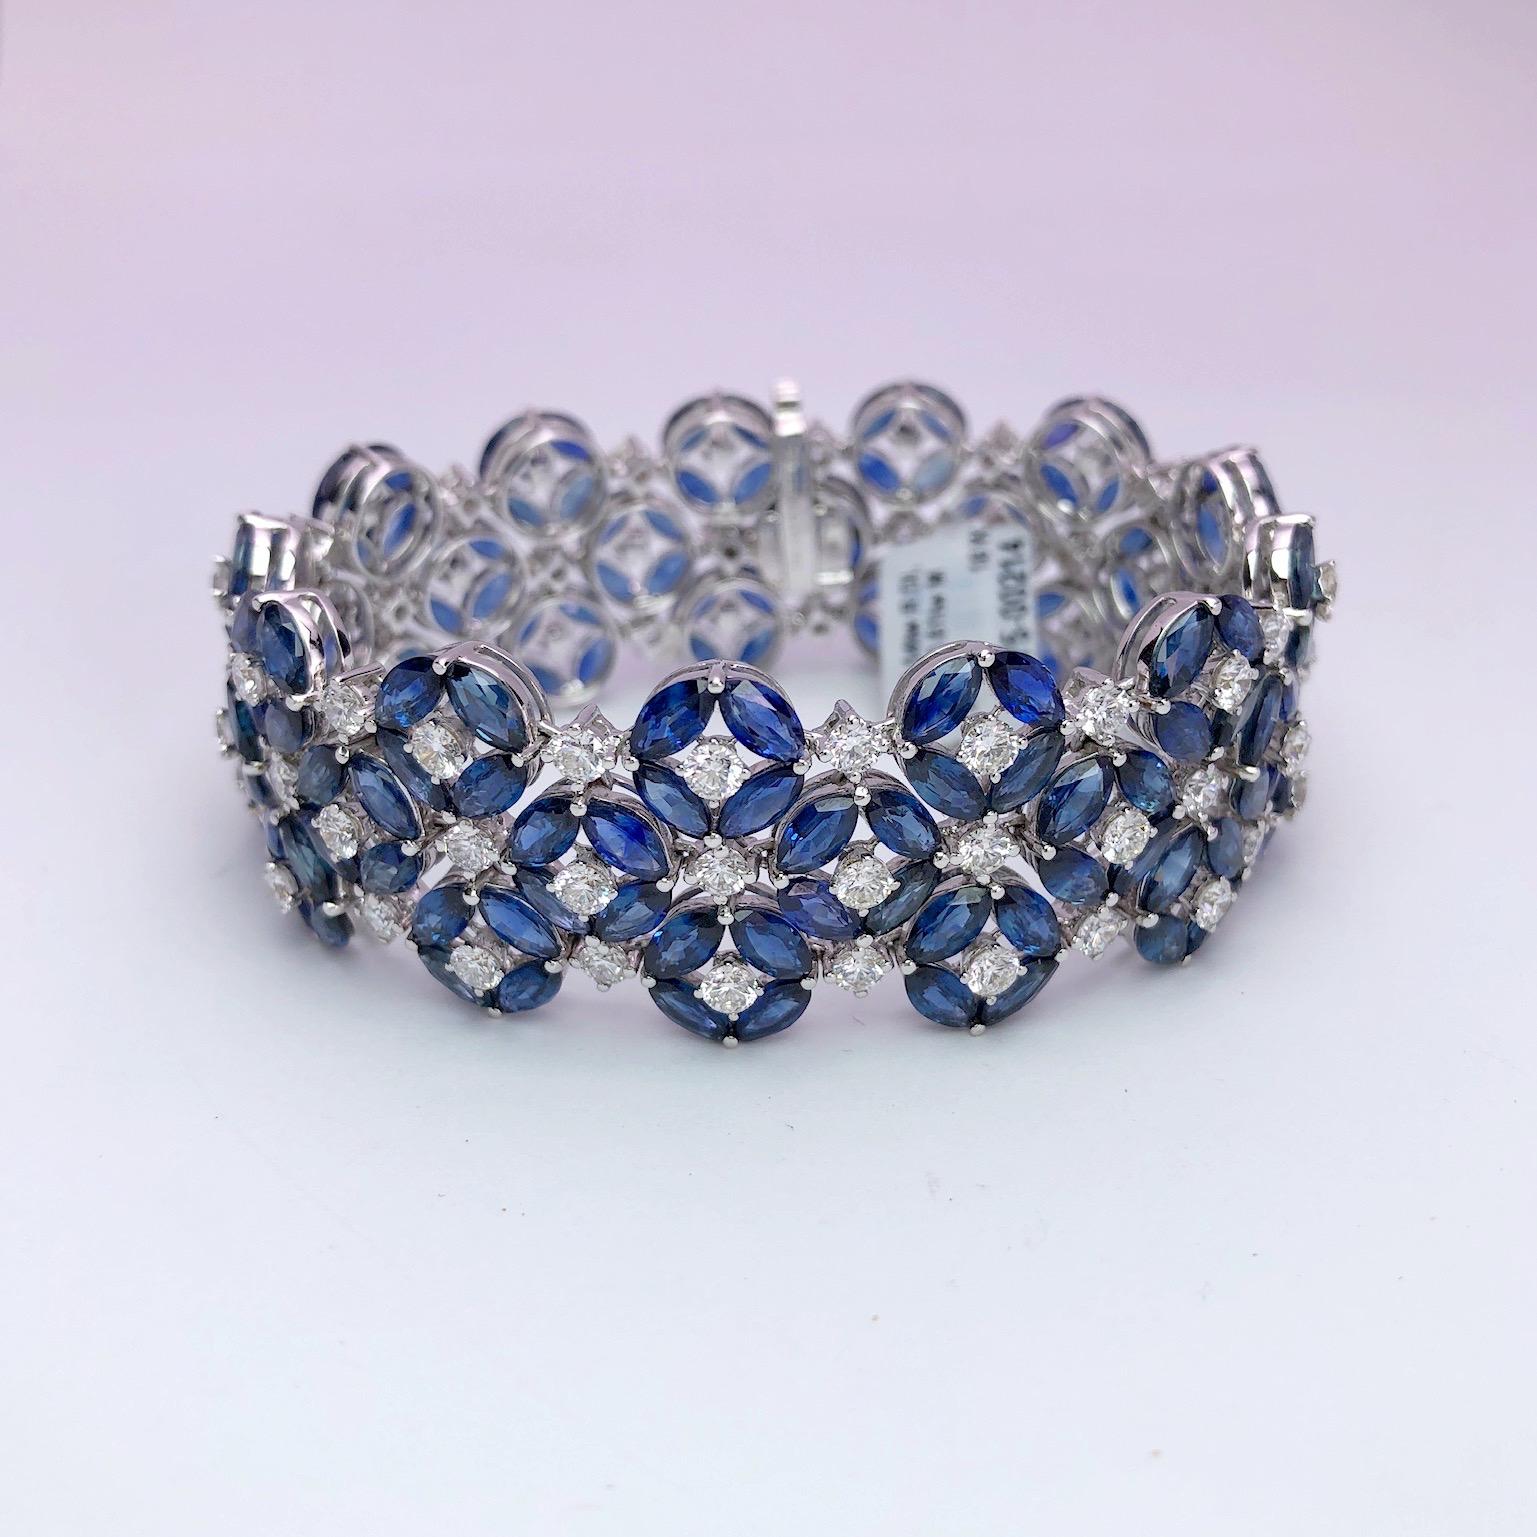 Magnificent 18 karat white gold bracelet. This bracelet is uniquely set with 3 rows of marquise cut blue sapphires and round brilliant diamonds. Four marquise sapphires with a round diamond center form a flower, each is joined together with a round